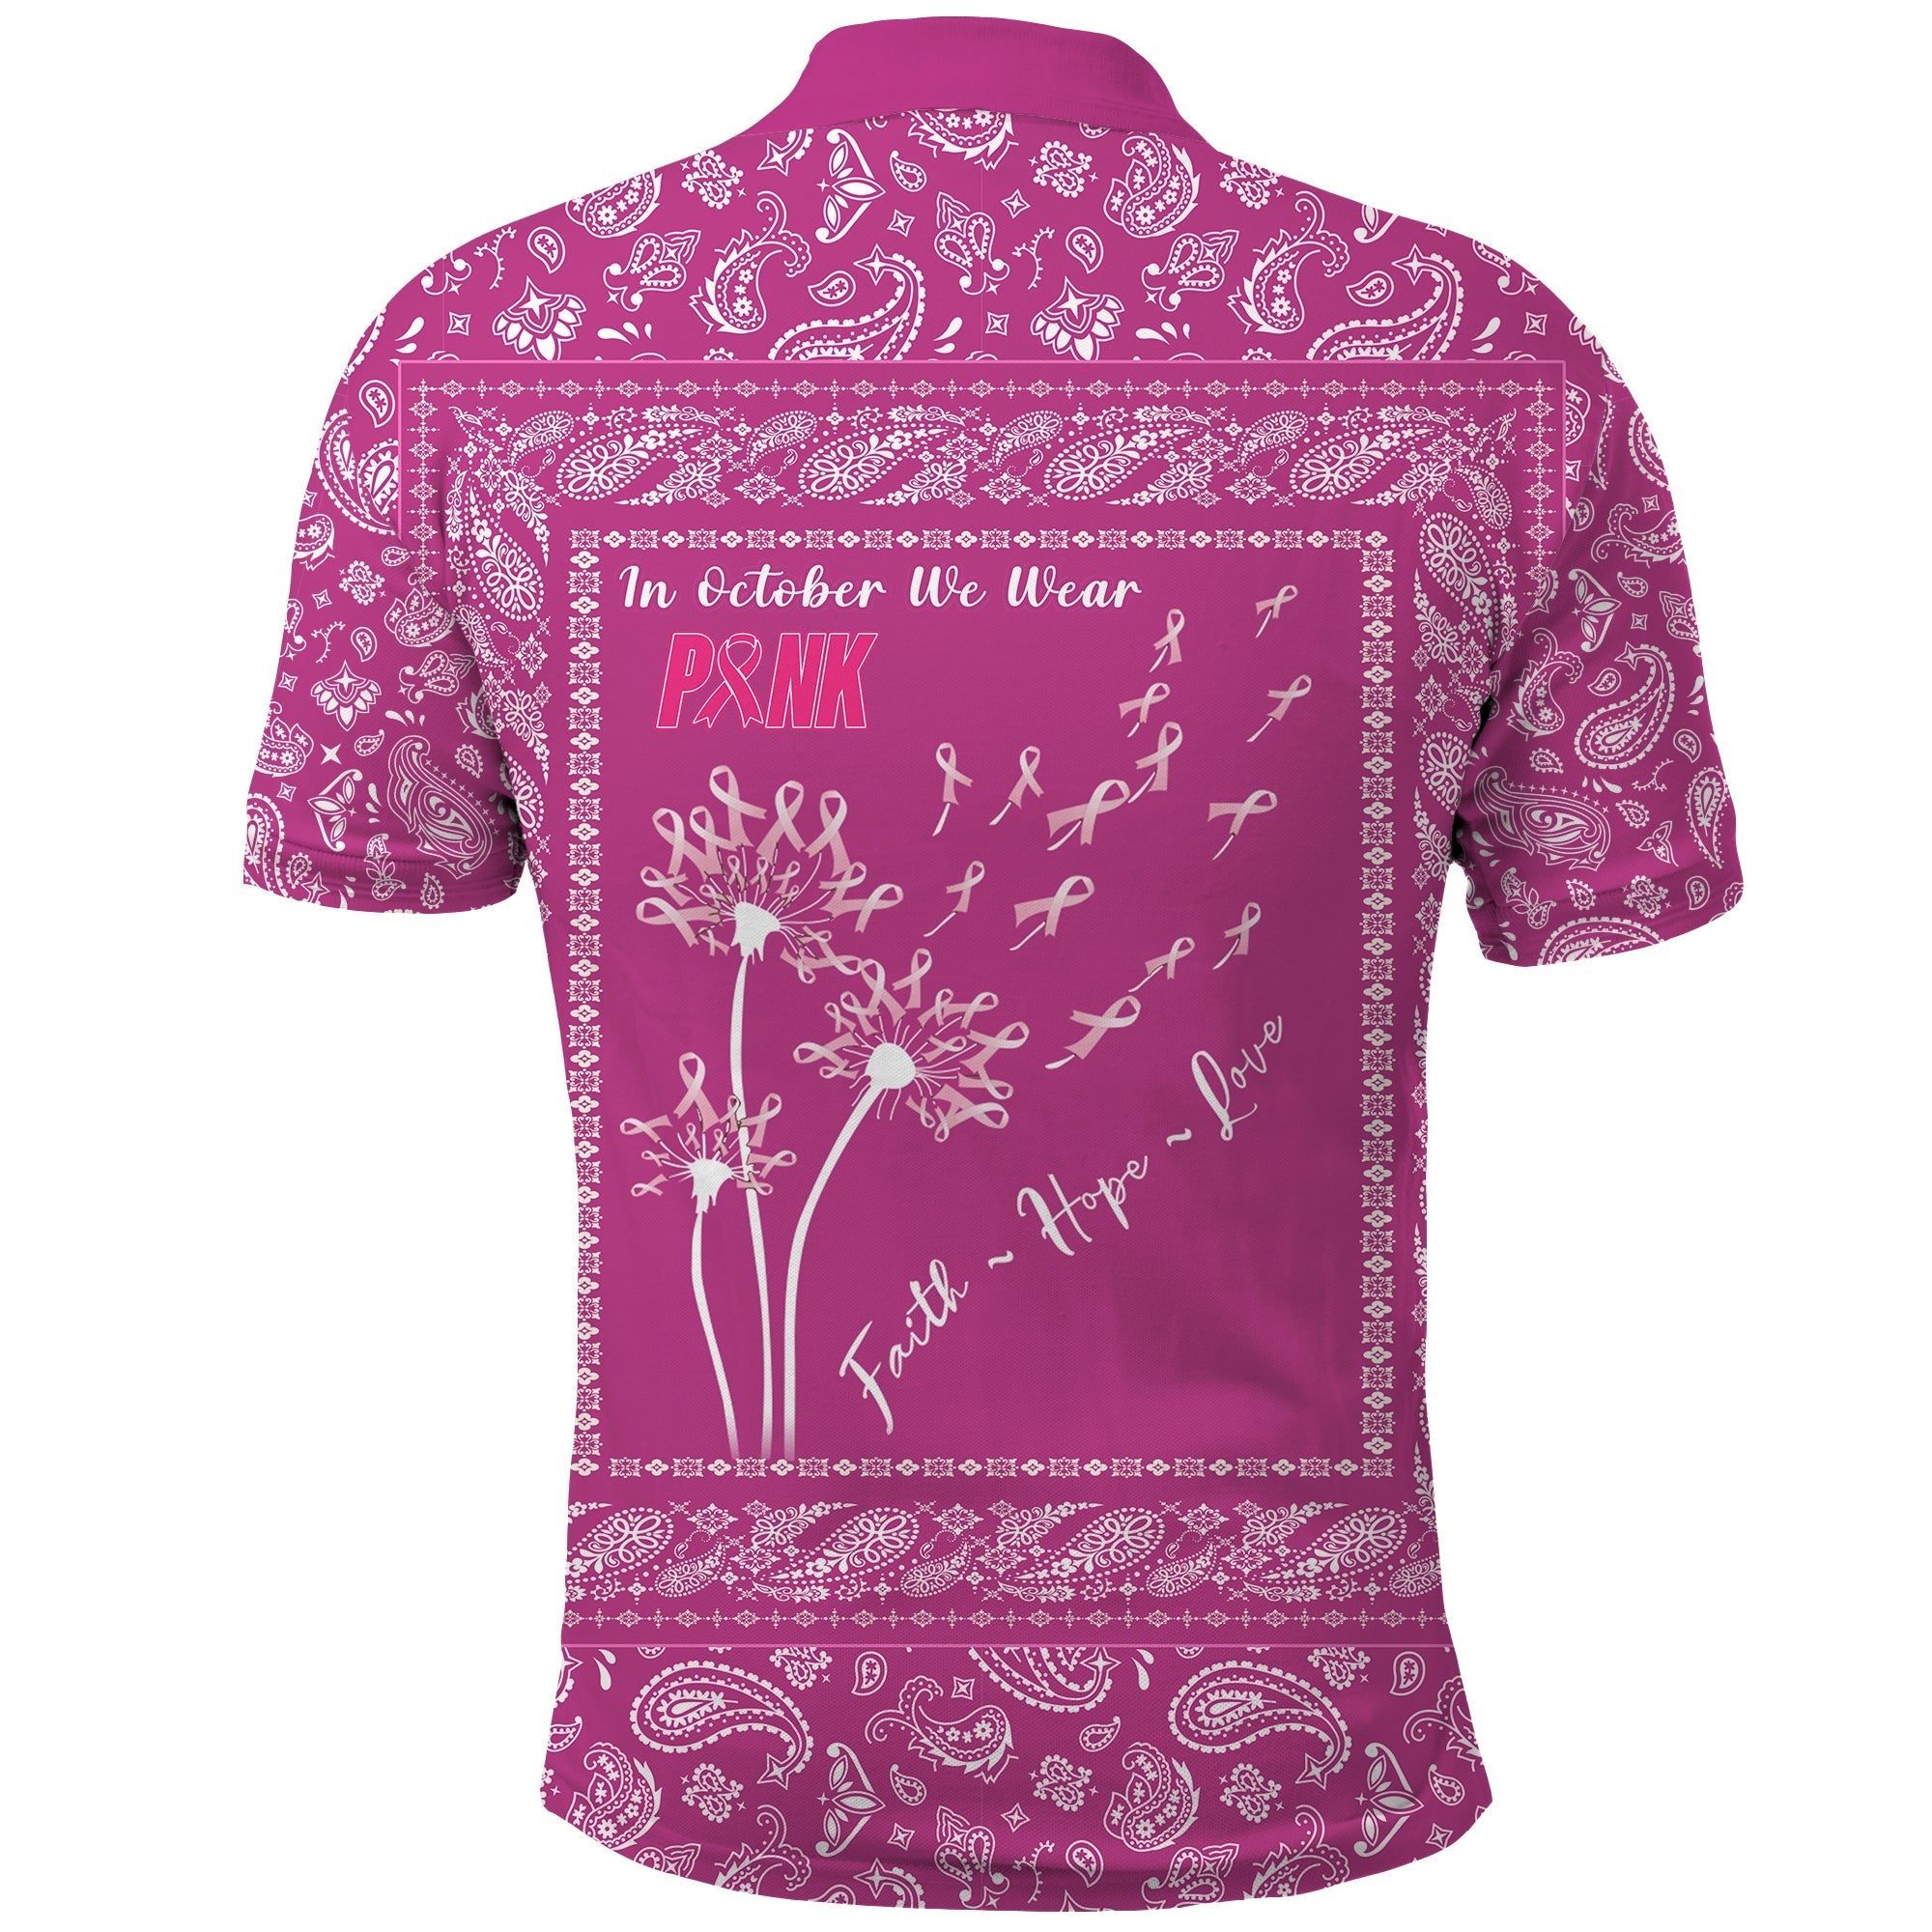 custom-personalised-breast-cancer-polo-shirt-pink-paisley-pattern-in-october-we-wear-pink